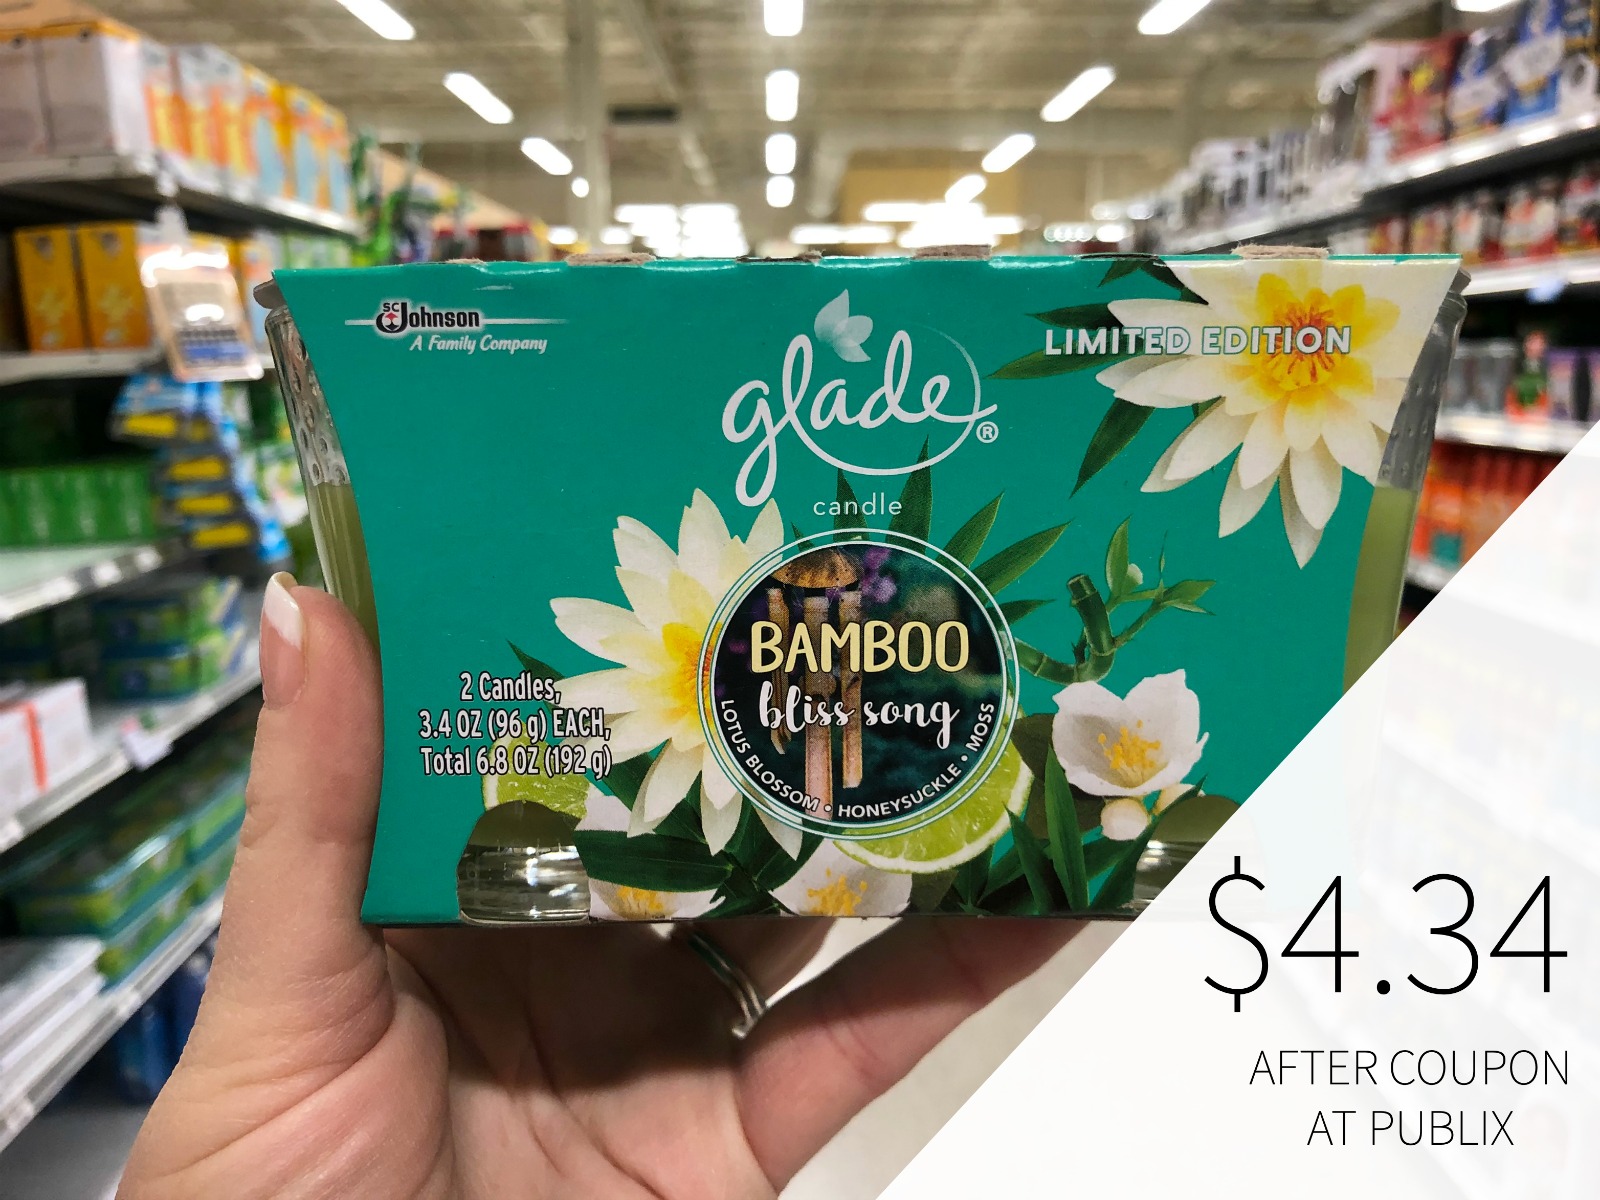 Get Savings On Glade® Products With The Spring Savings Coupons – Use The Coupons To Try The Glade® Limited Edition Spring Collection